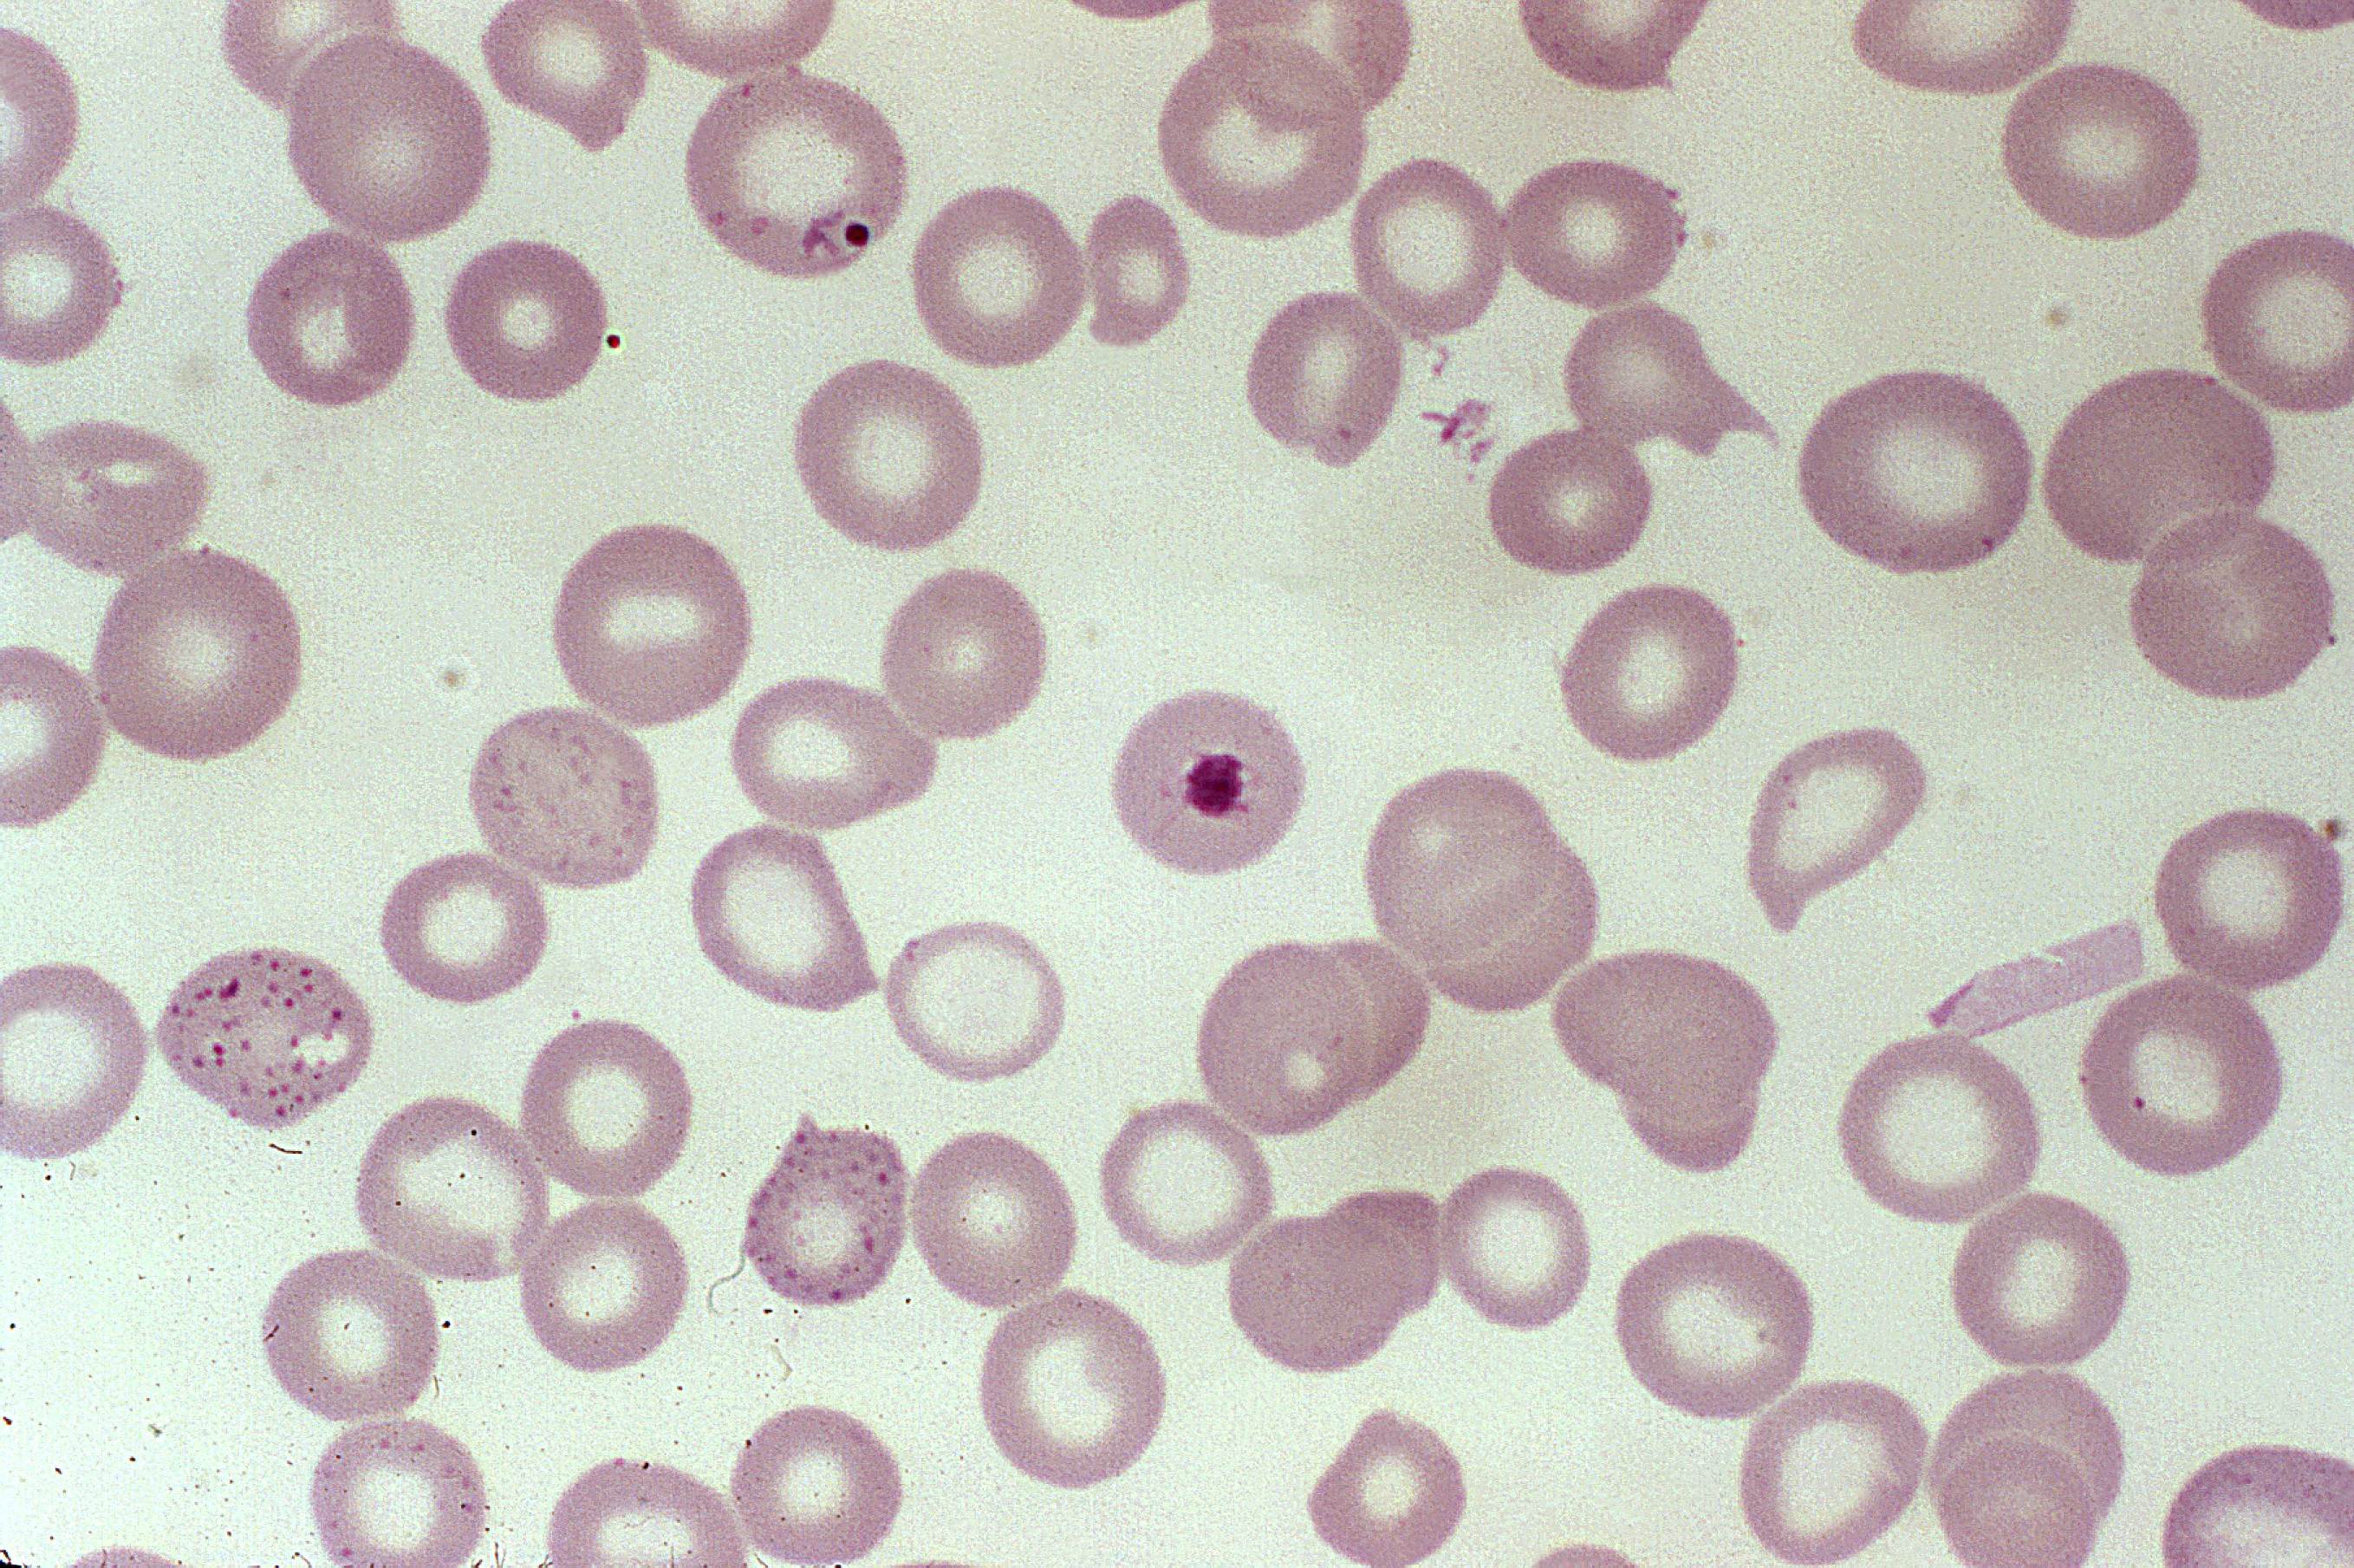 Free picture: blood smear, shows, plasmodium falciparum, parasite, ring, stage ...2716 x 1809